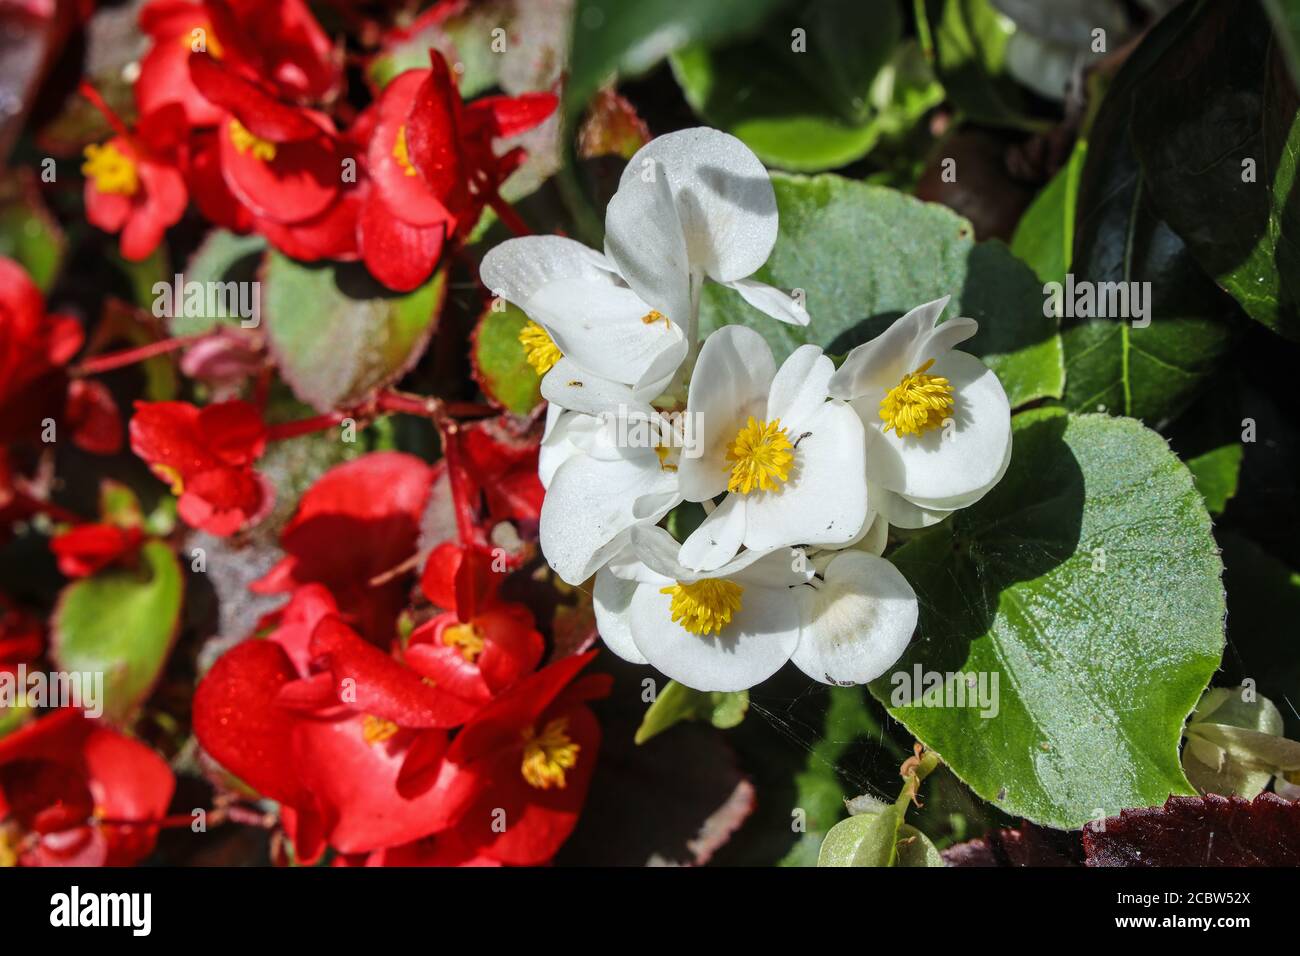 Waxy and colourful Begonia garden flowers growing in a tub Stock Photo